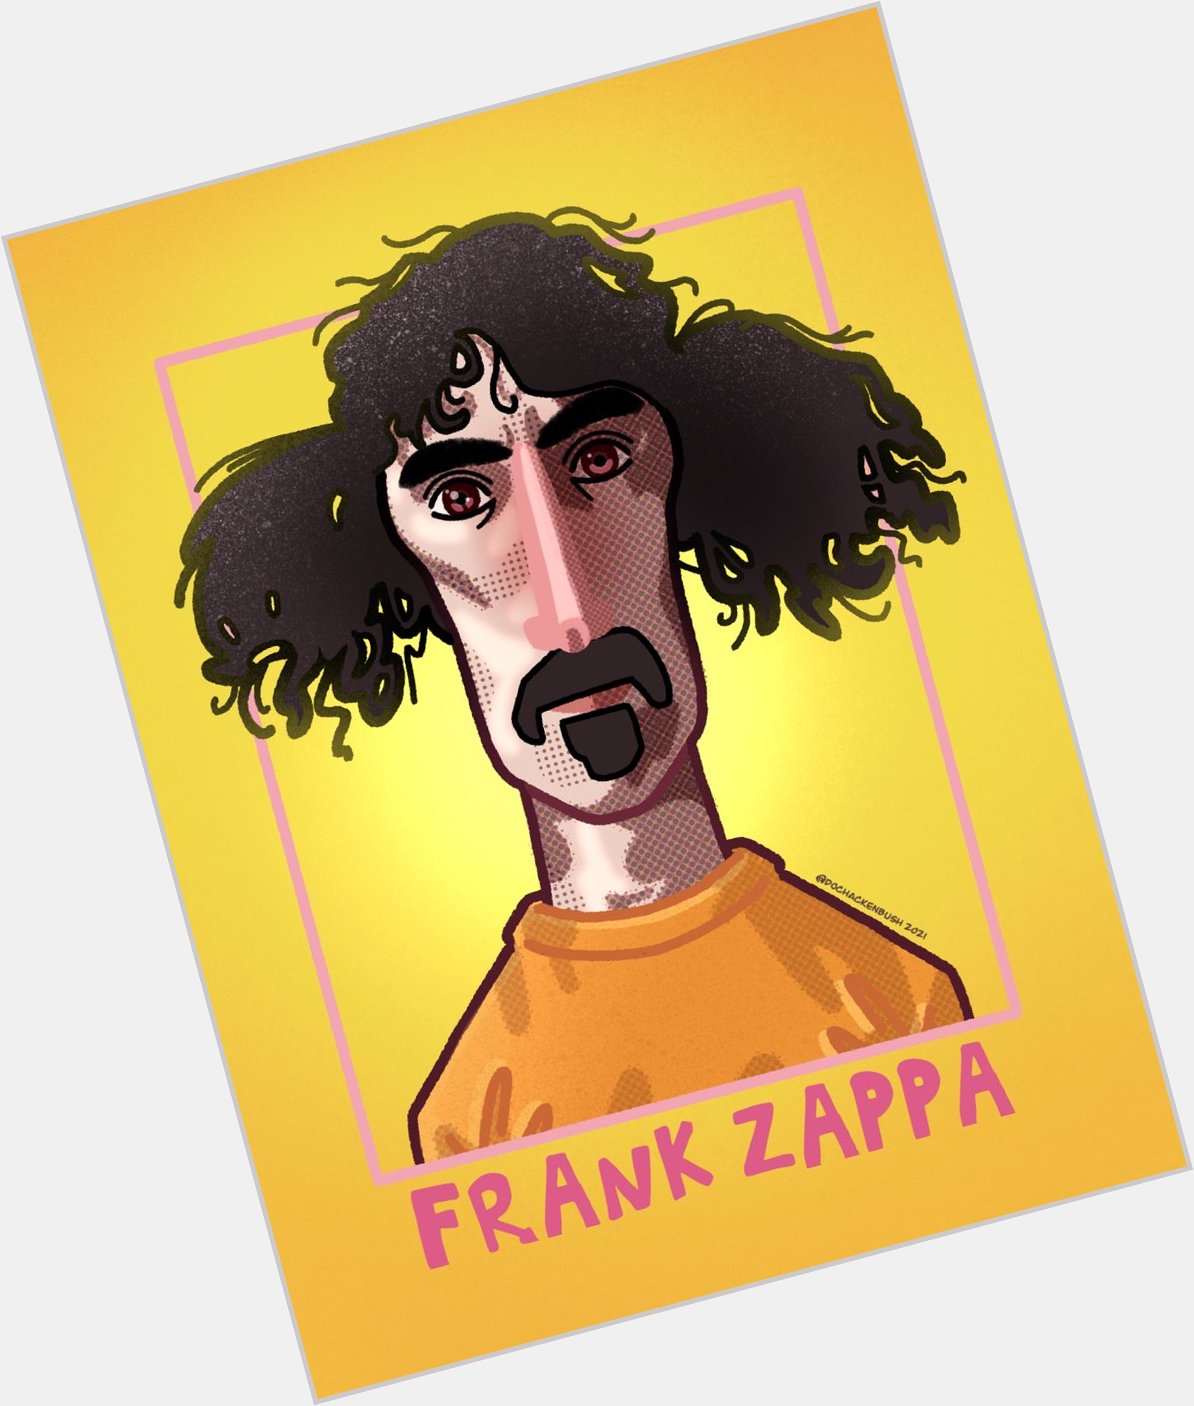 The great Frank Zappa would have been 81 today. Happy birthday, Frank. 